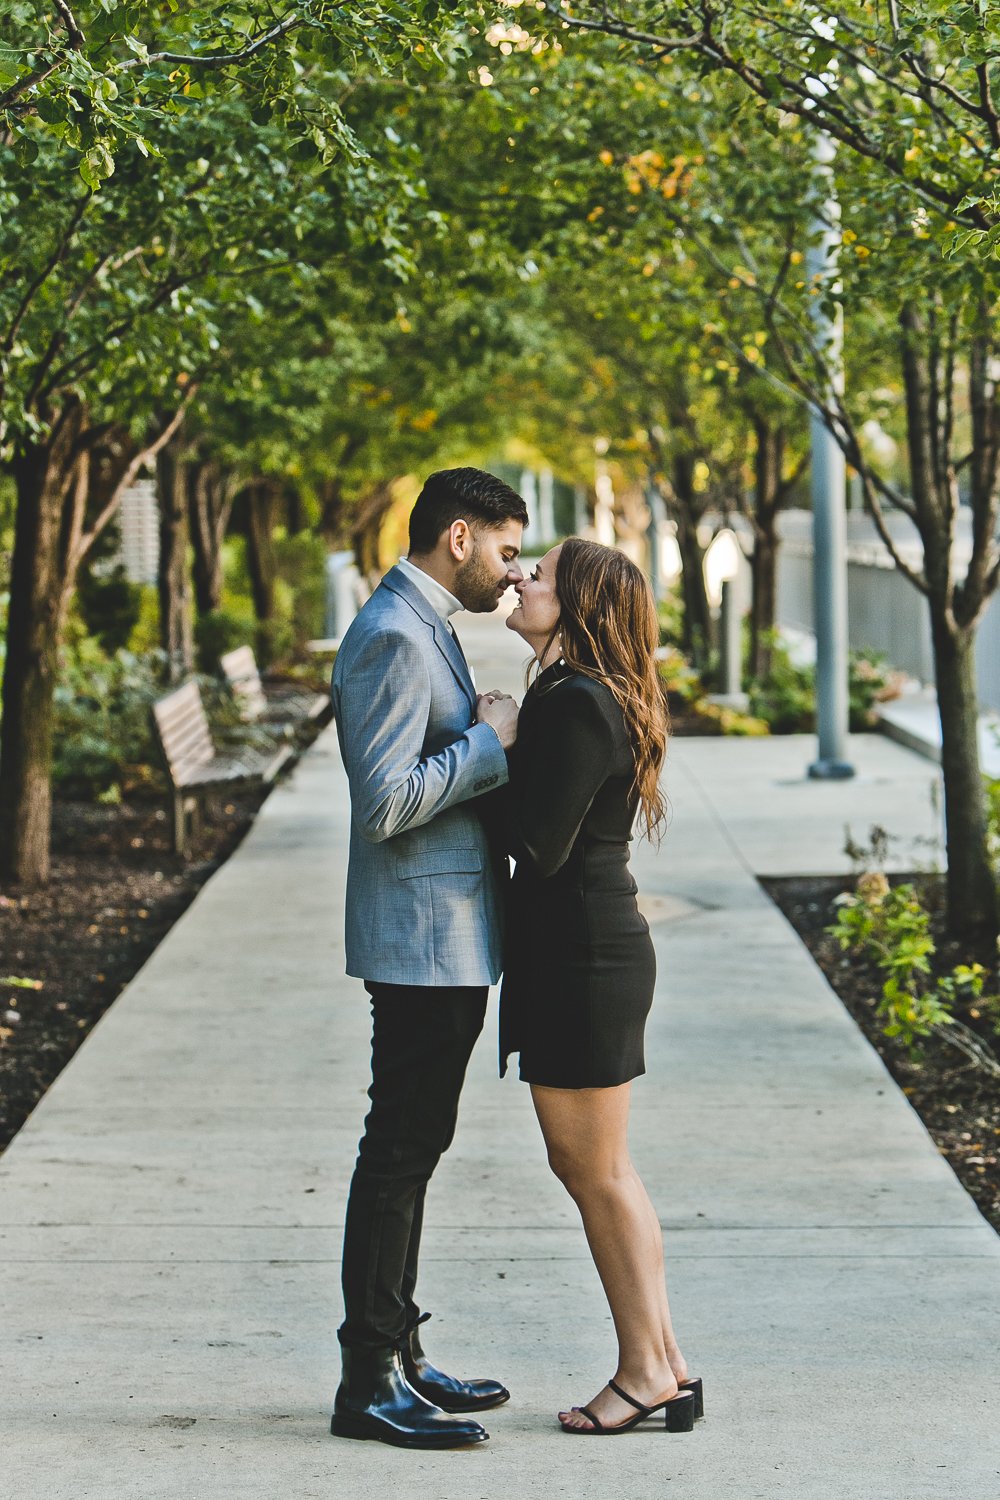 Downtown Chicago Engagement Session_JPP Studios_TaylorKlaus_15.JPG